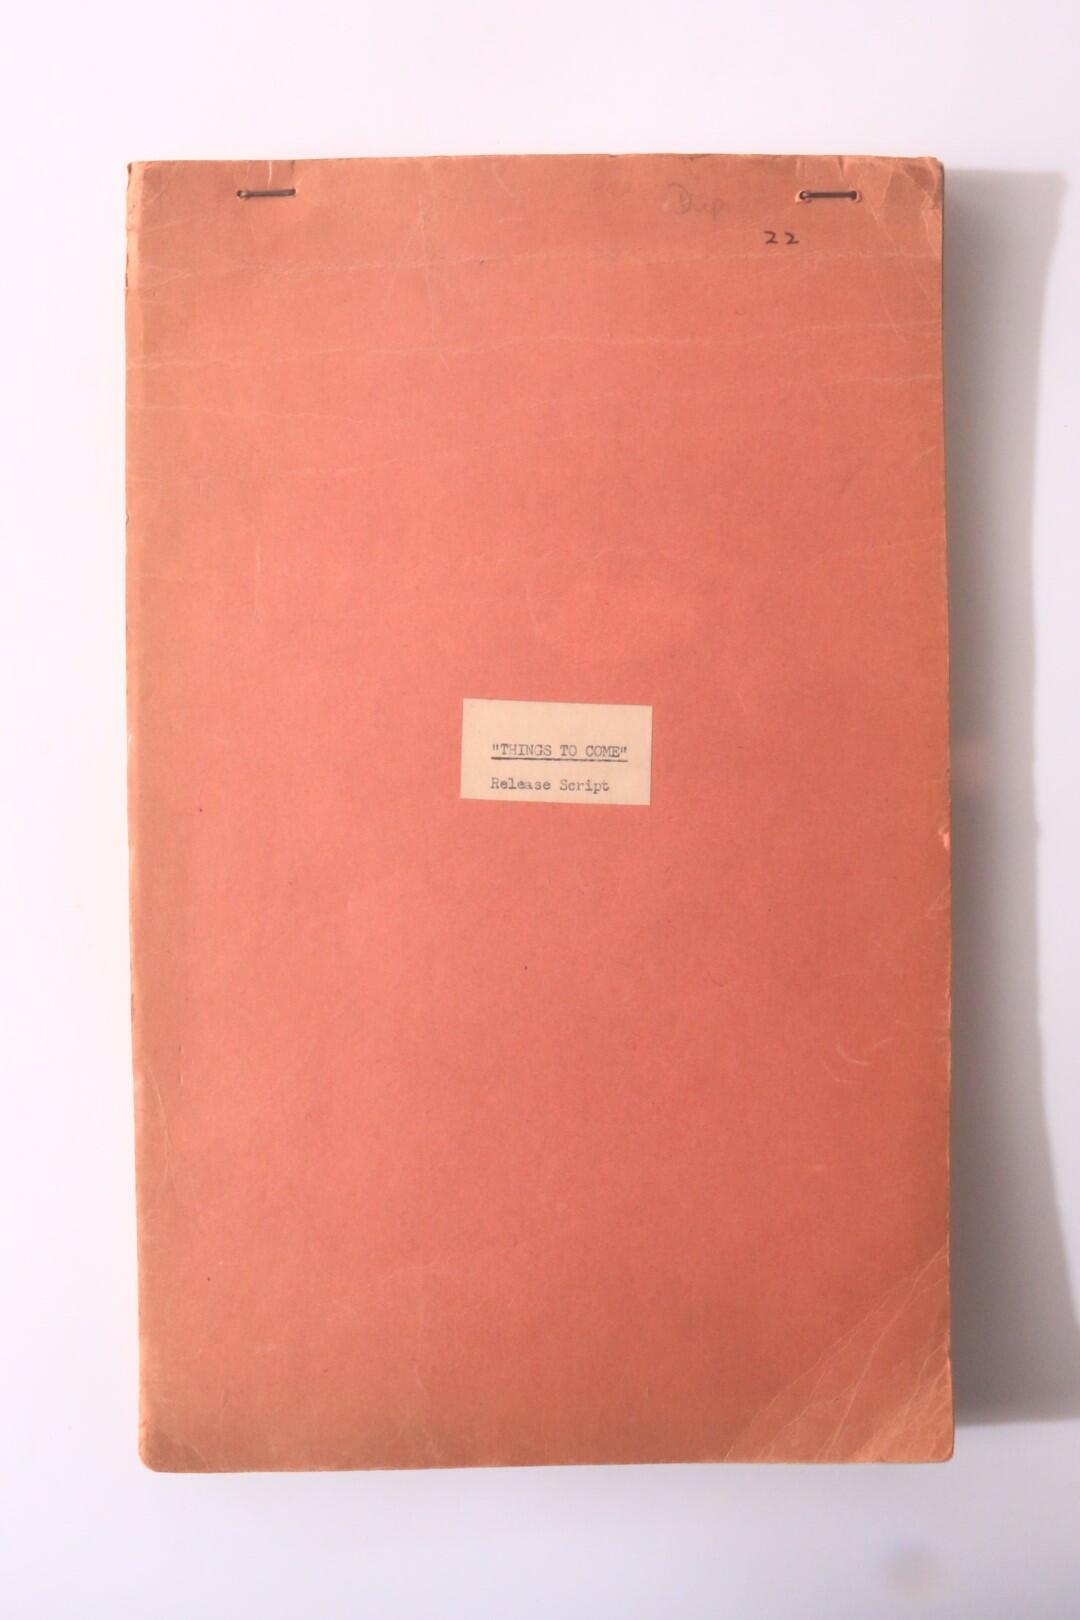 H.G. Wells - Things to Come: Release Script - , 1936, Manuscript.